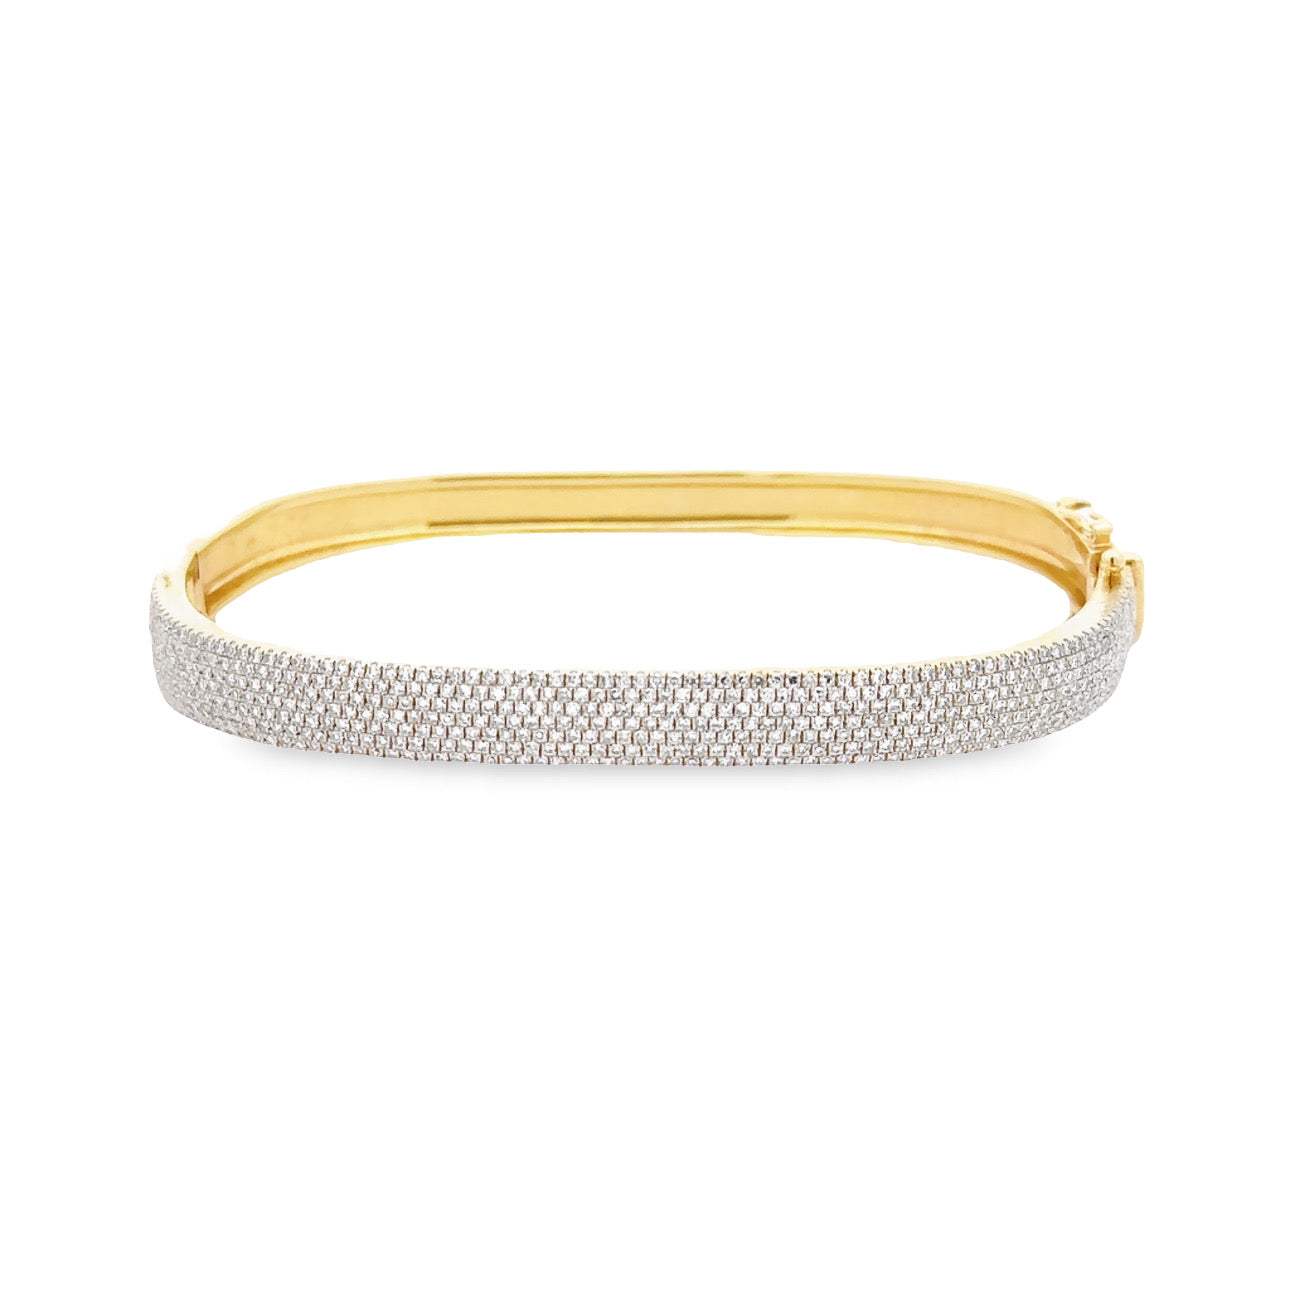 WD1258 14kt Gold Rectangular shaped Open latch cuff with pave diamonds